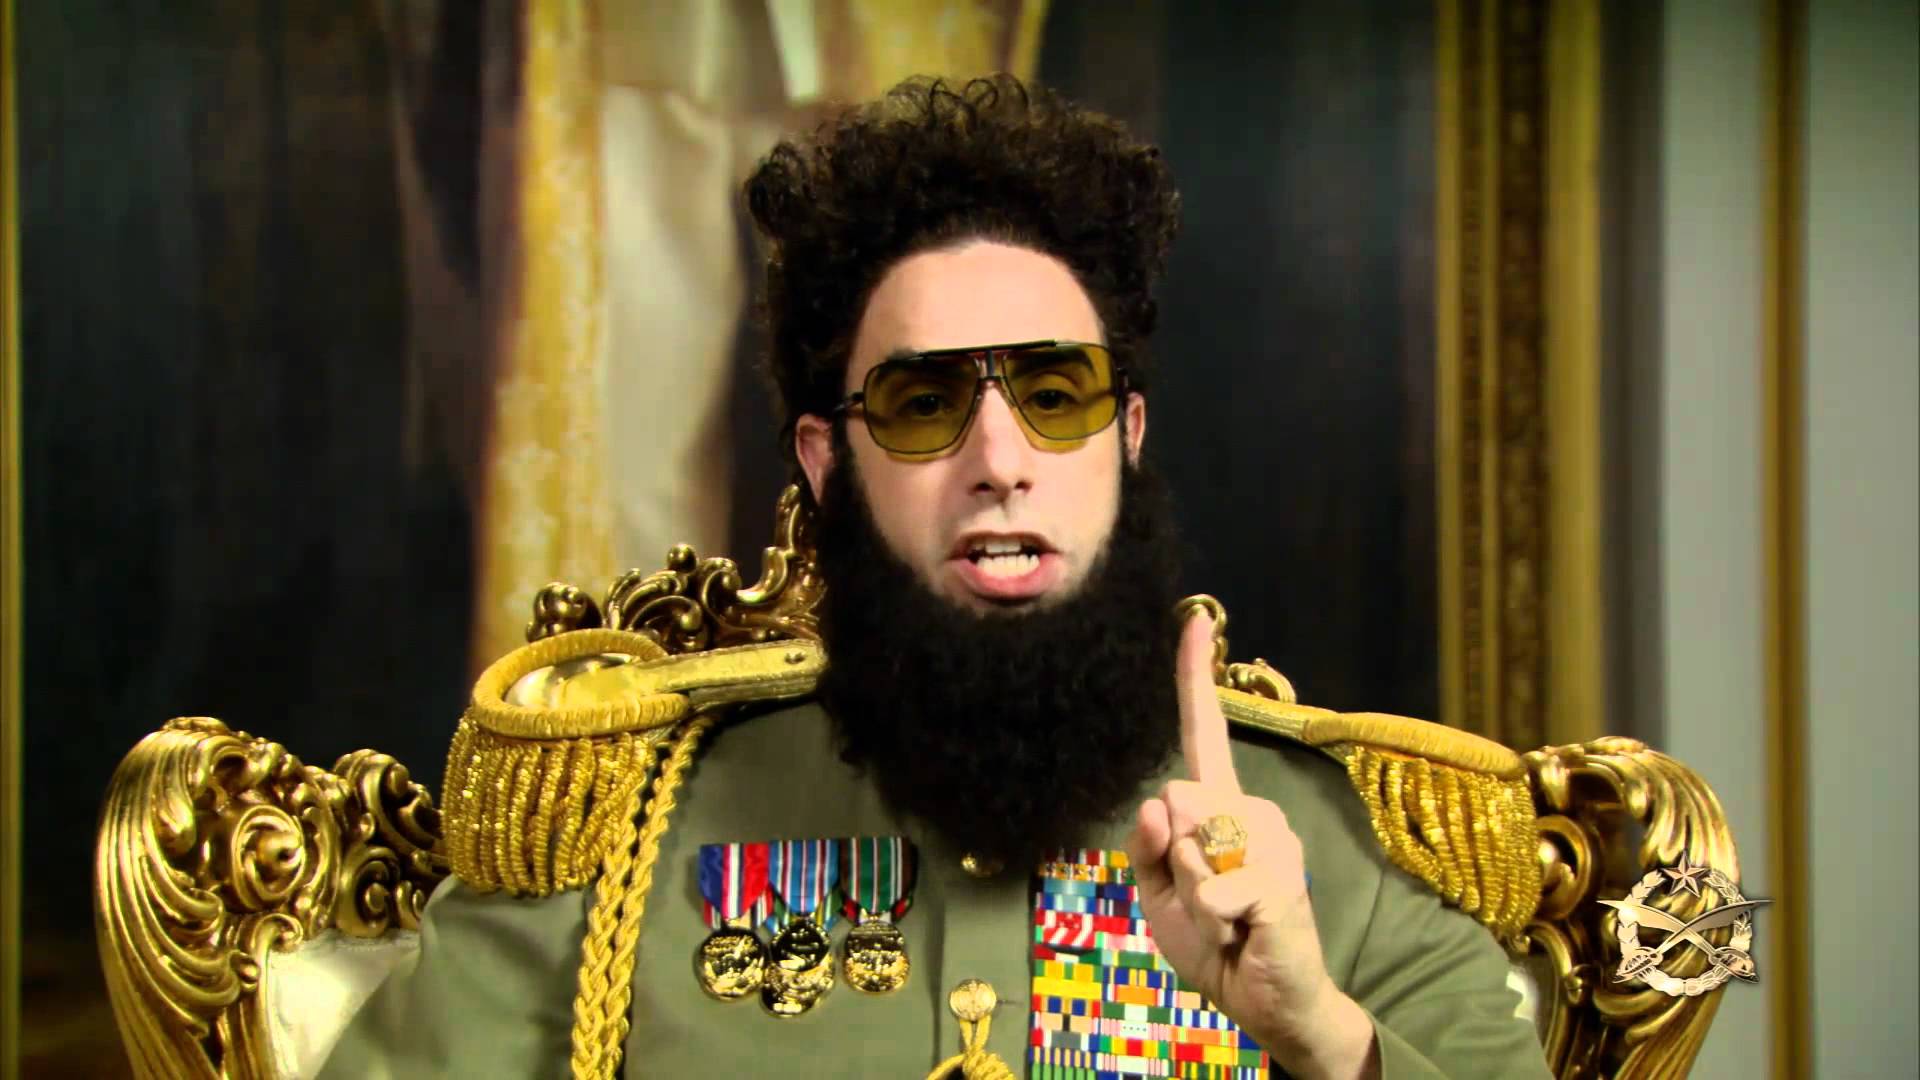 High Resolution Wallpaper | The Dictator 1920x1080 px